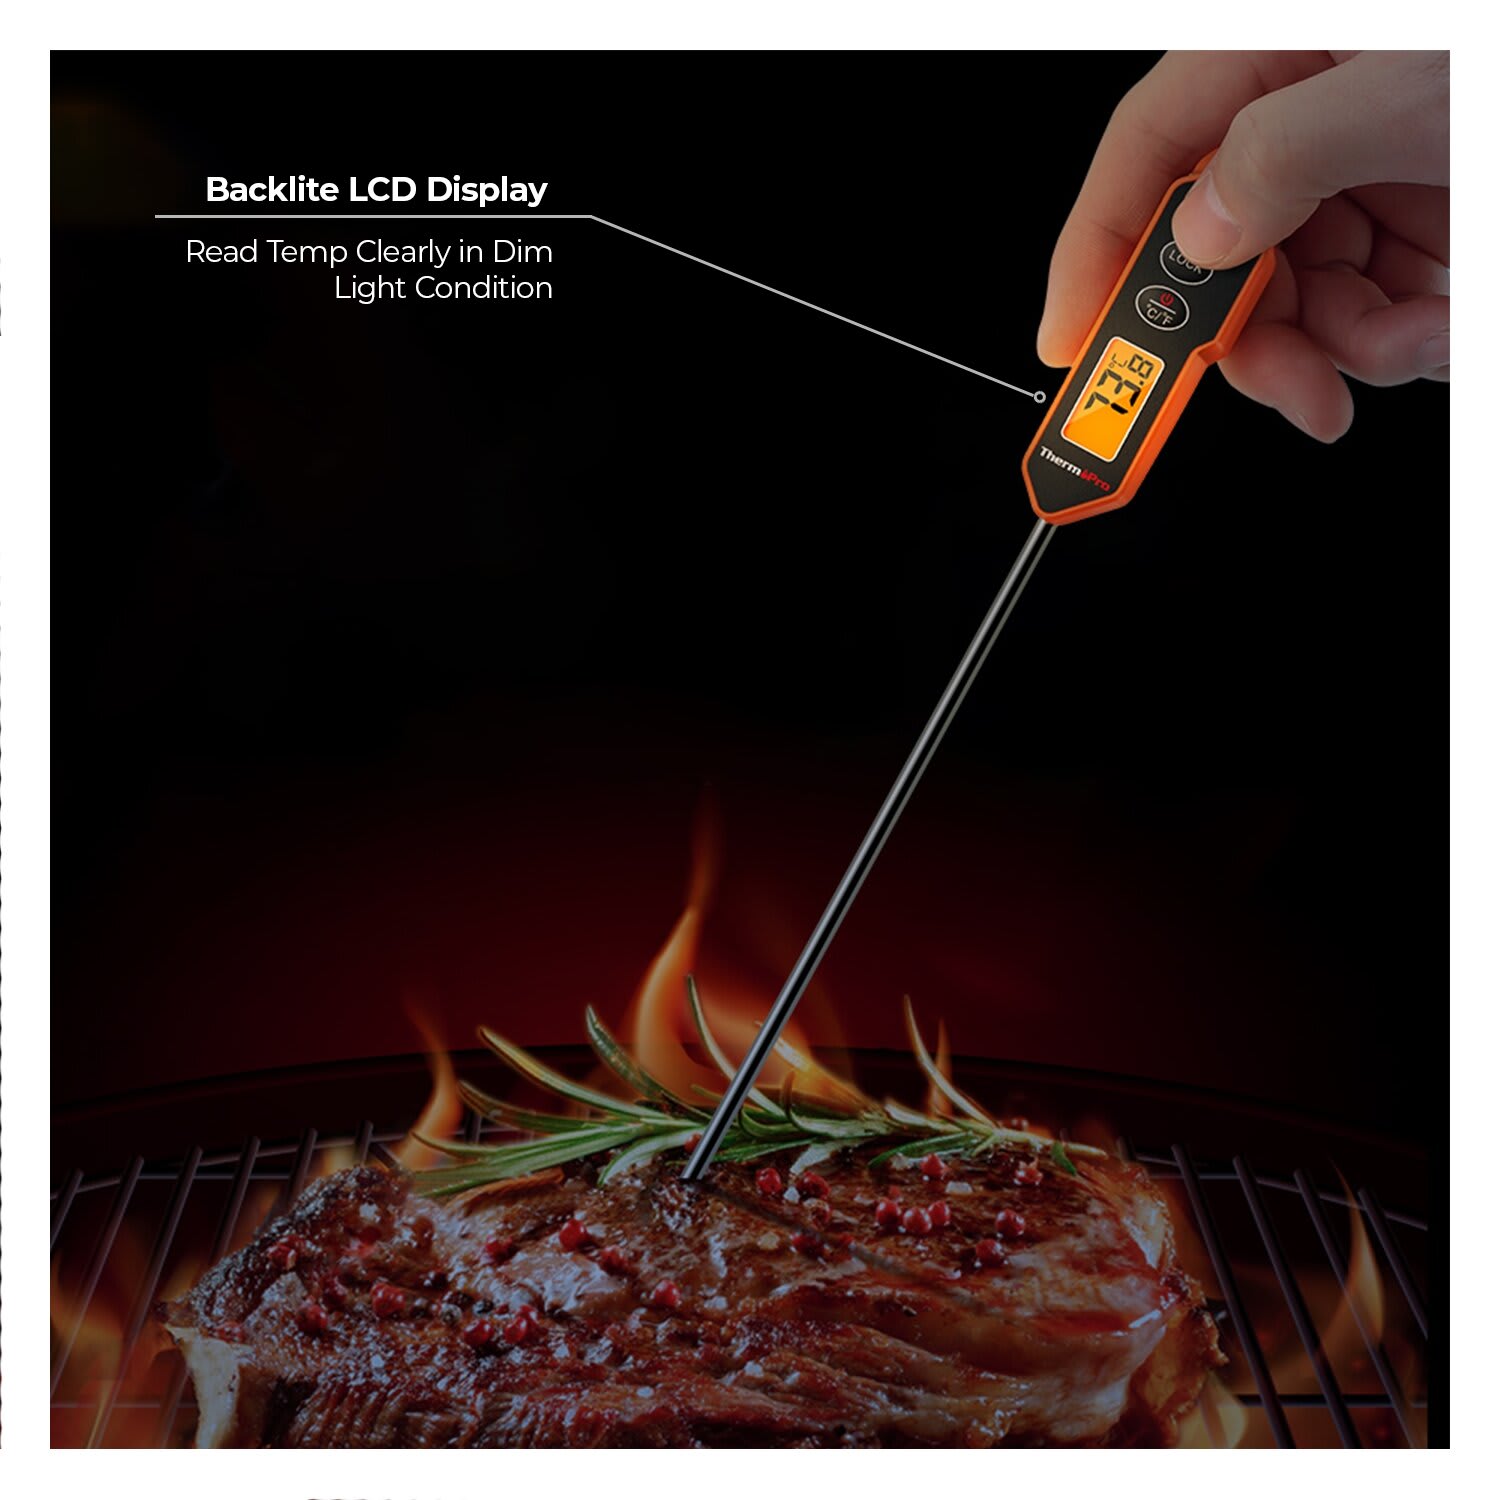 Dash Precision Quick-Read Meat Thermometer - Waterproof Kitchen and Outdoor  Food Cooking Thermometer with Digital LCD Display - BBQ, Chicken, Seafood,  Steak, Turkey, & Other Meat, Batteries Included 